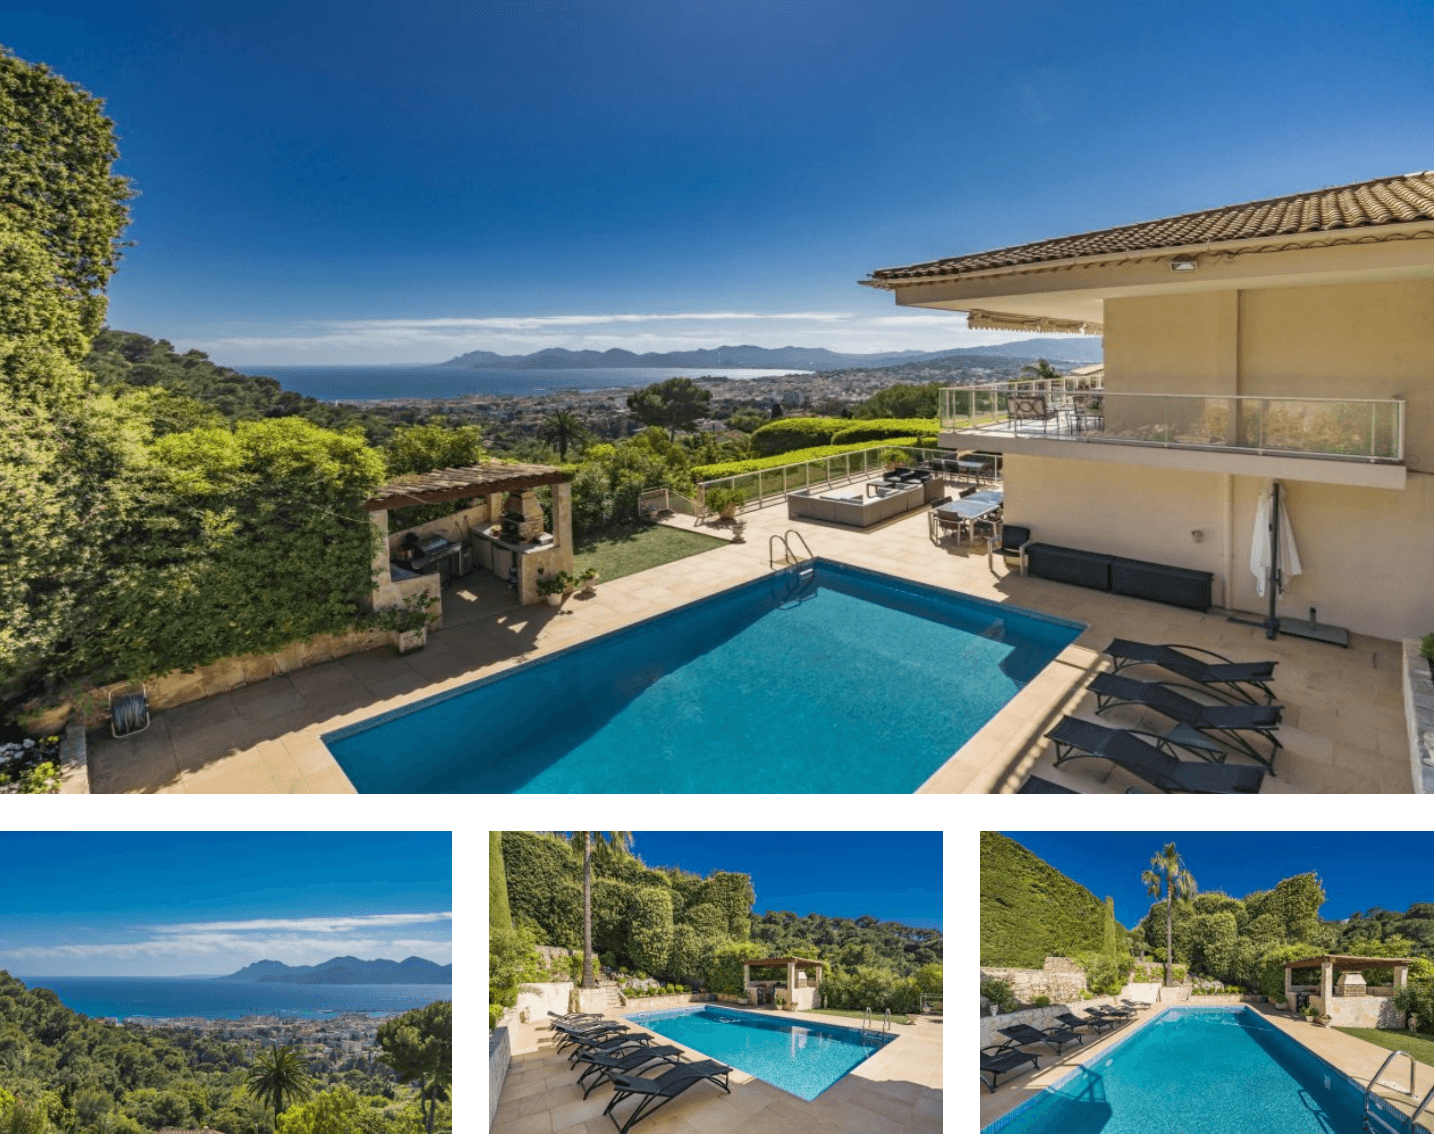 Villa with swimming pool and panoramic sea view in Cannes Californie.